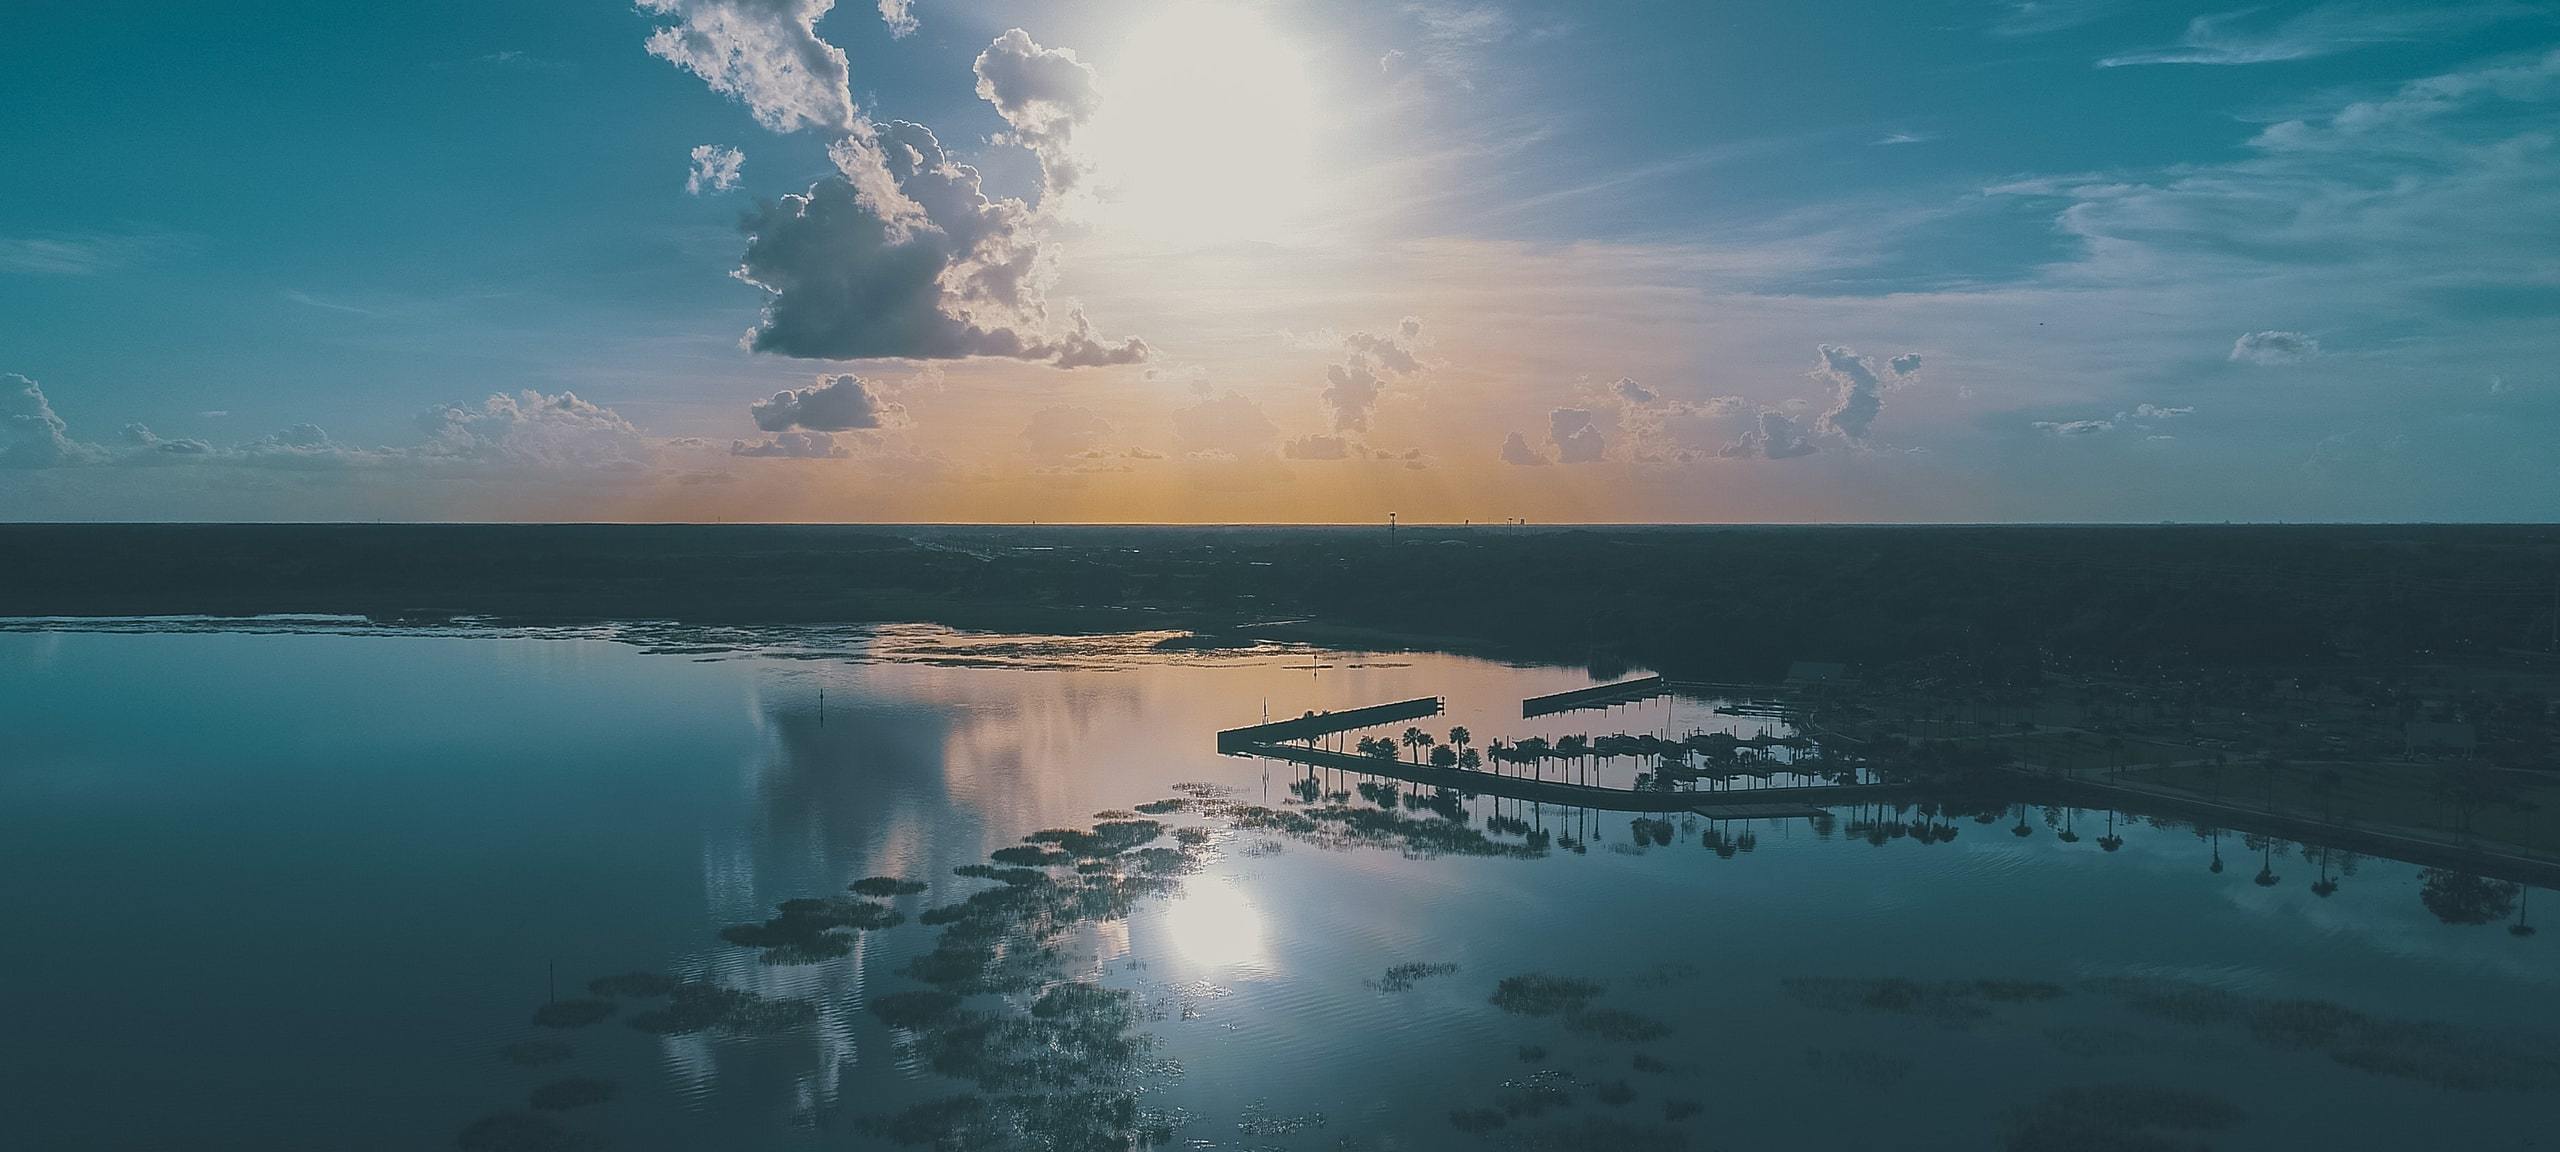 Sunrise over Kissimmee's lakefront area